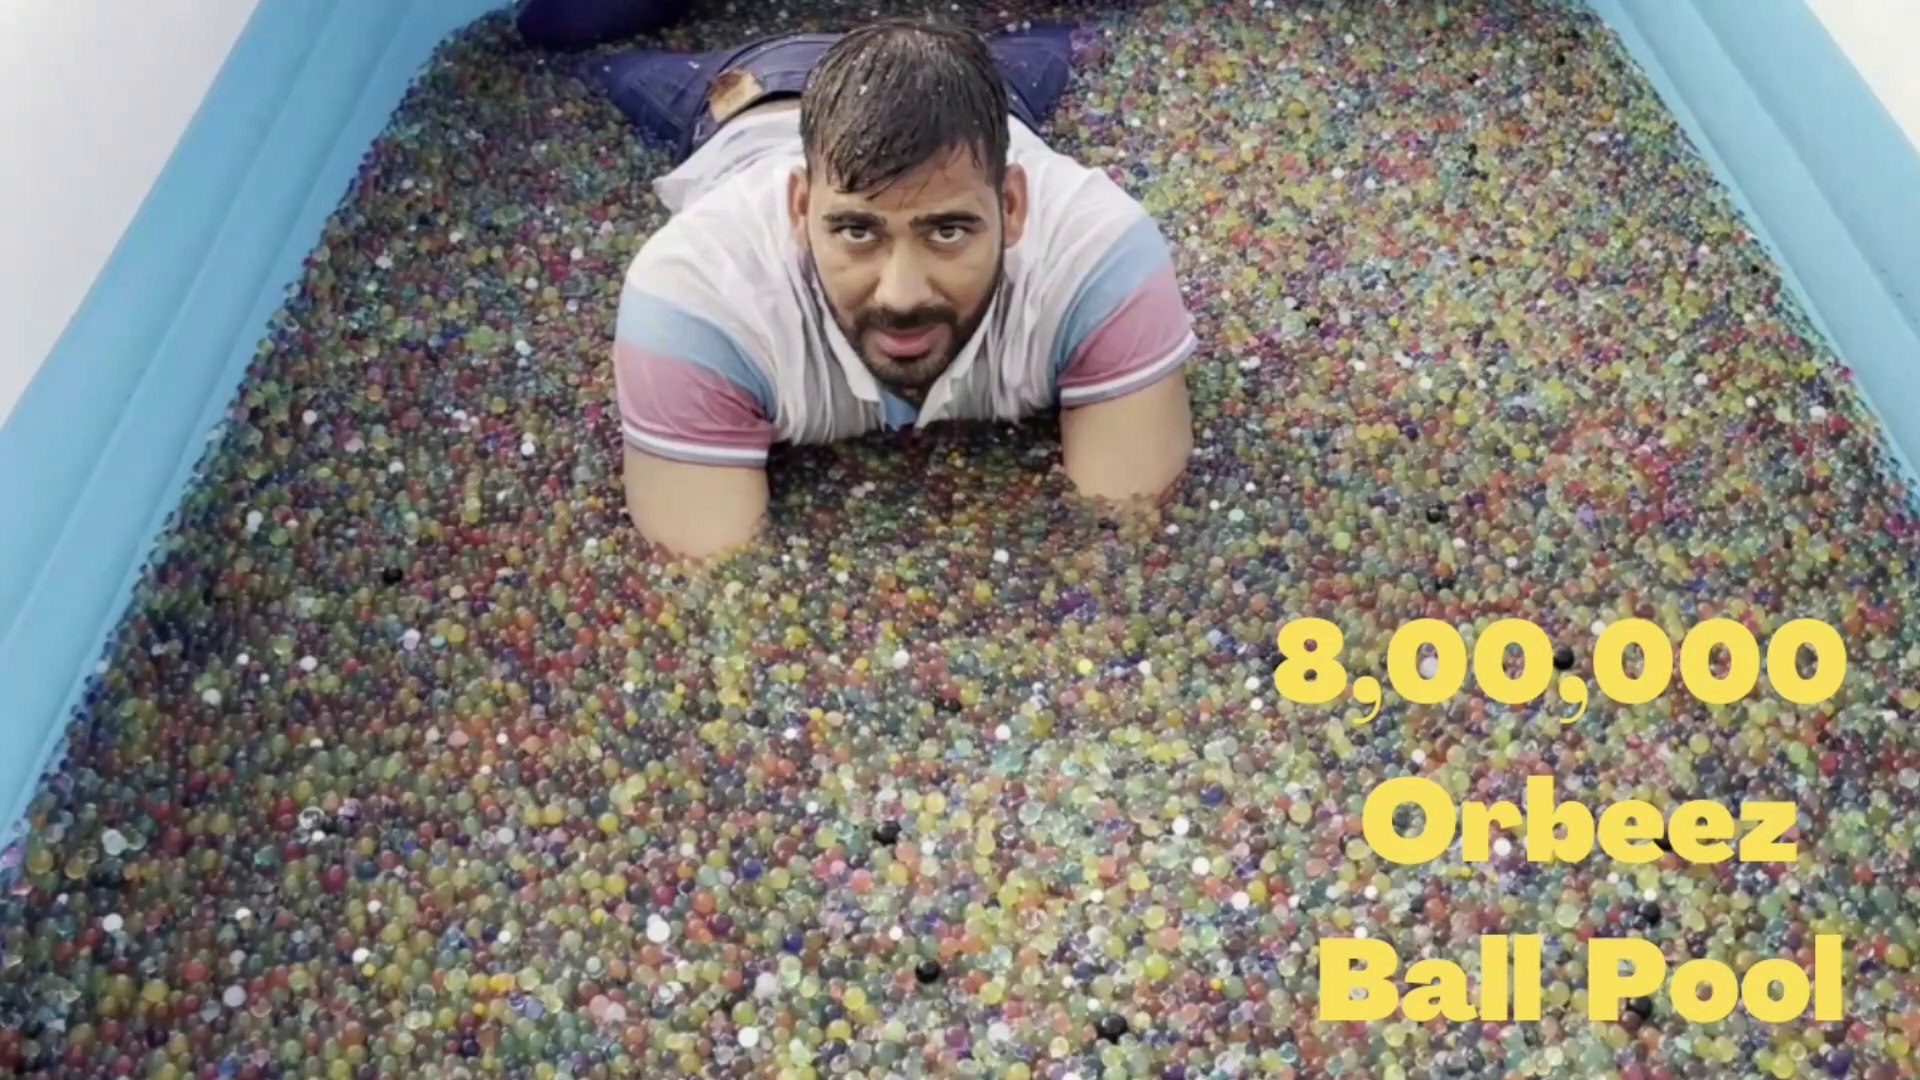 DIY GIANT ORBEEZ STRESS BALL TESTED!! Giant Waterbeads Stress Ball HUGE FUN  & EASY 